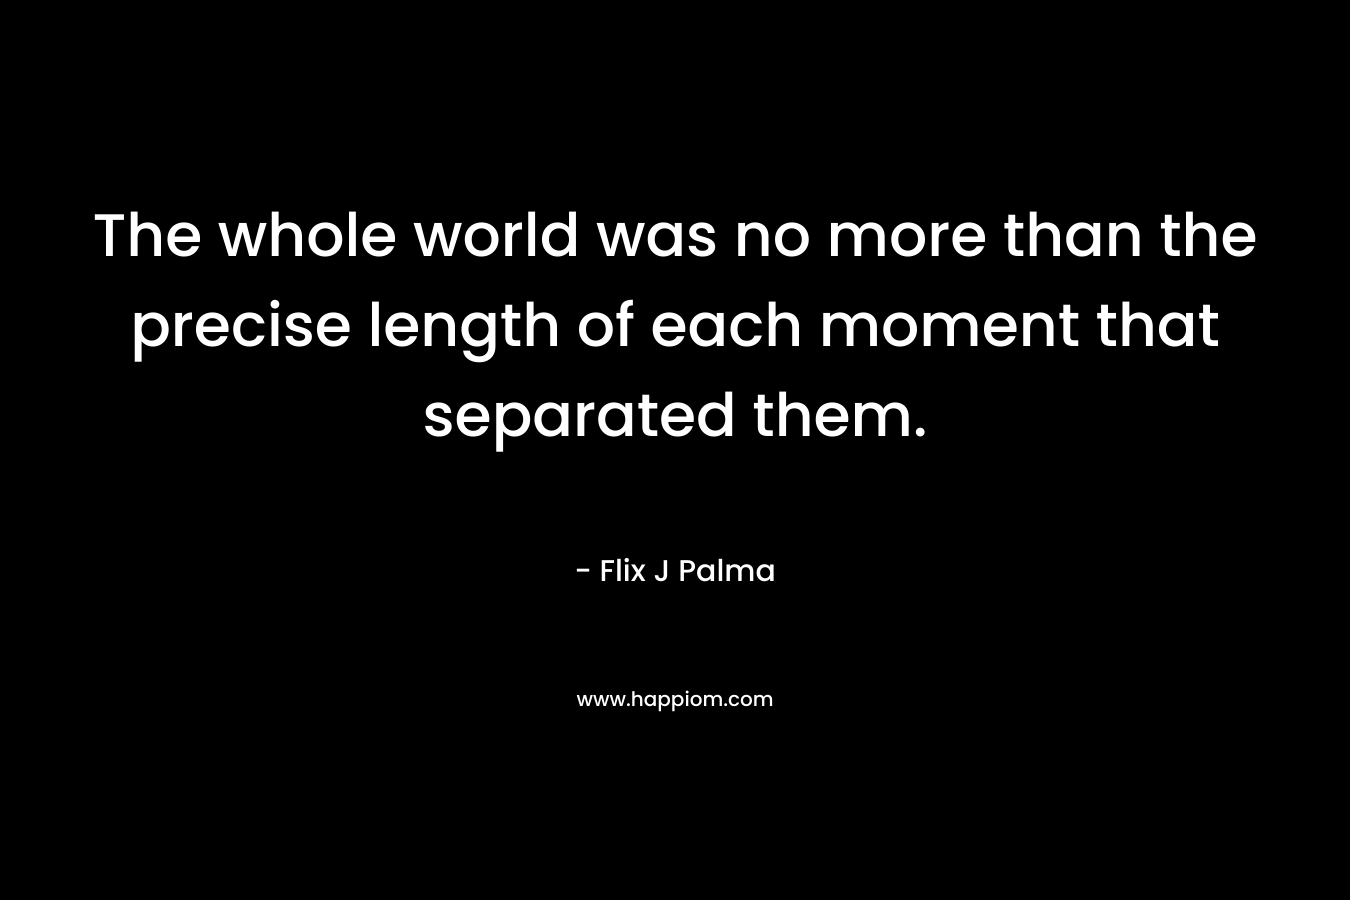 The whole world was no more than the precise length of each moment that separated them.